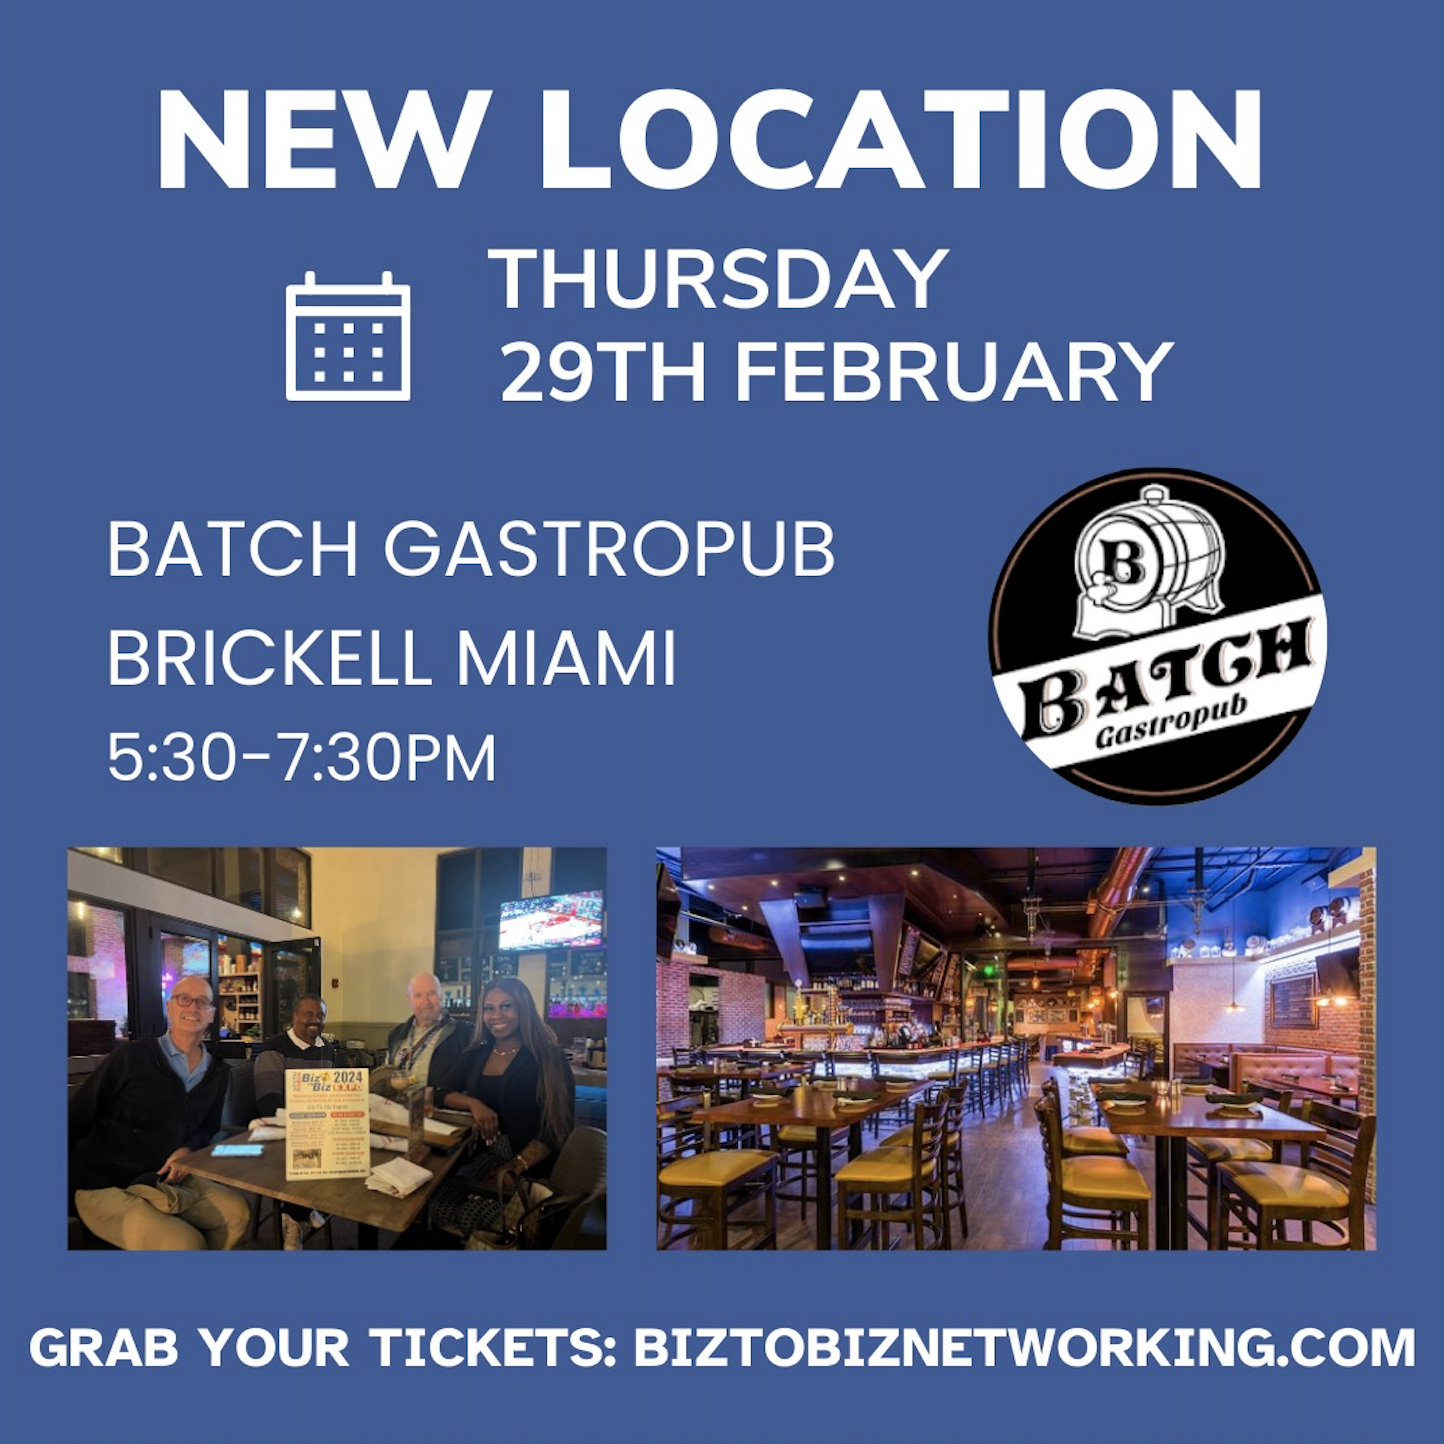 If you’re in South Florida, and looking to make brand new business connections, then join Biz To Biz Thursday, Feb. 29th from 5:30 to 7:30 PM!